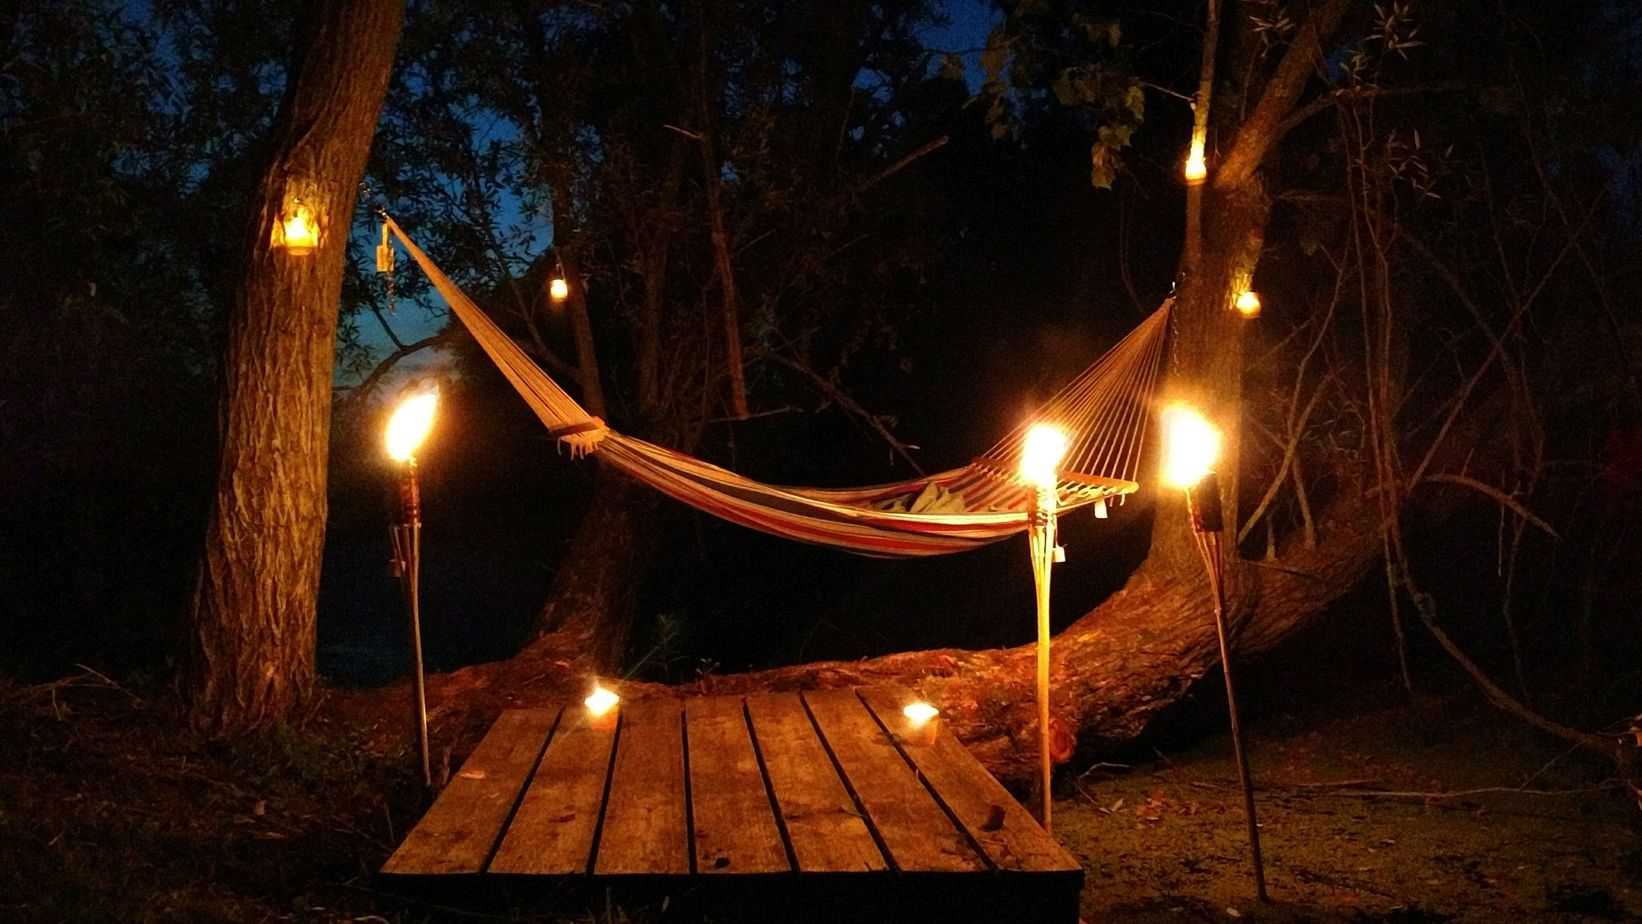 A hammock setup in the courtyard with lit tiki torches